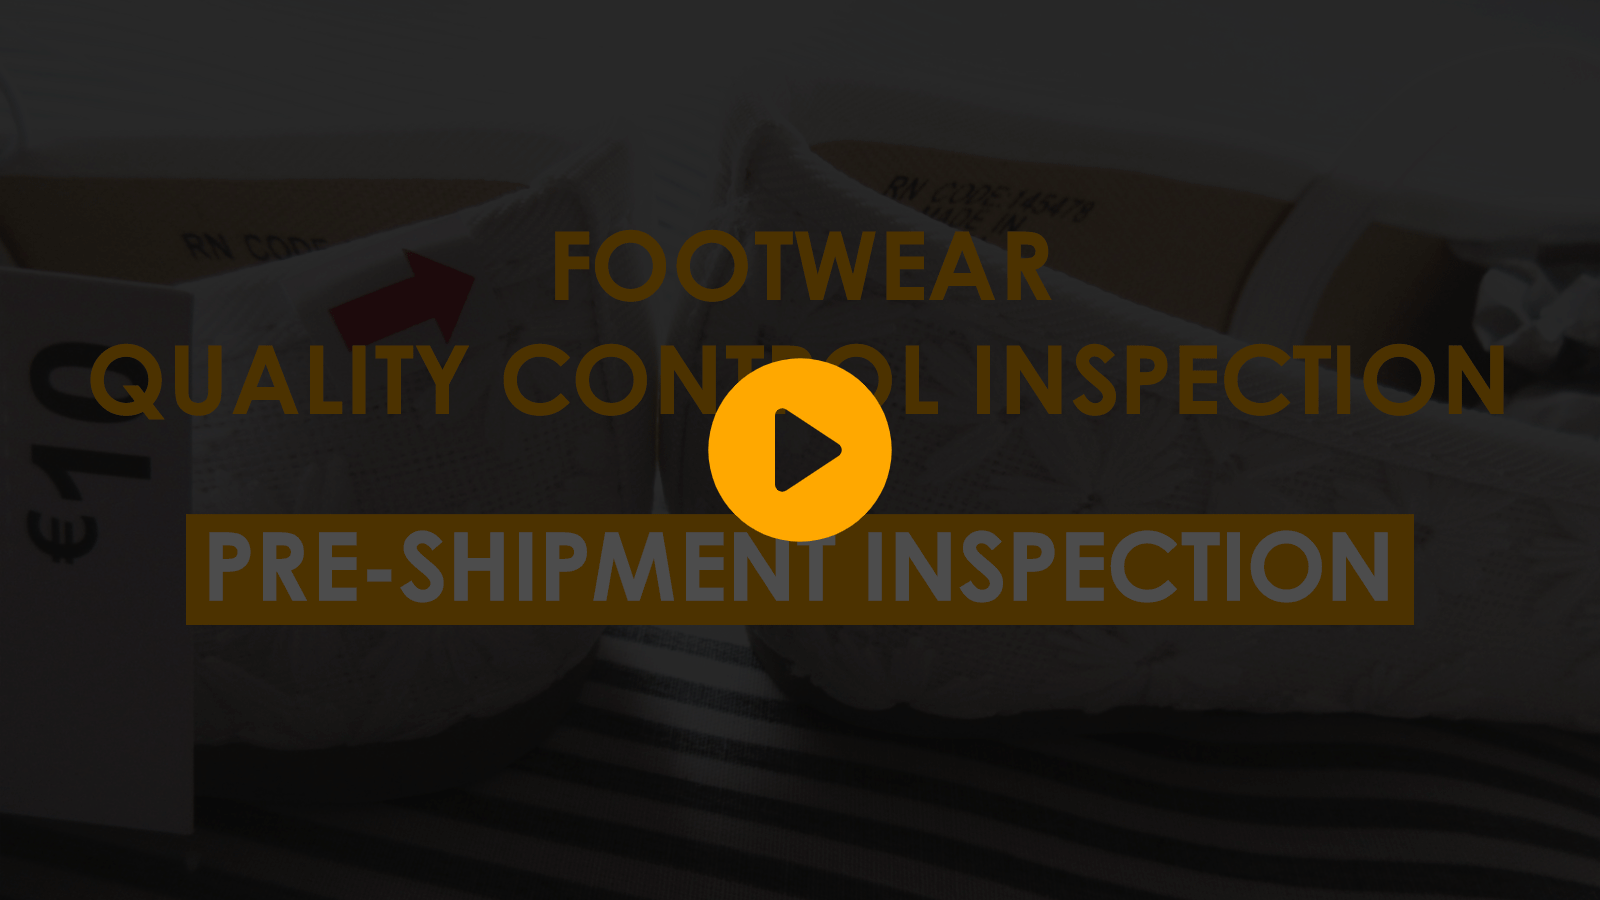 Footwear Quality Control Inspection: Essential Checklist for Shoes